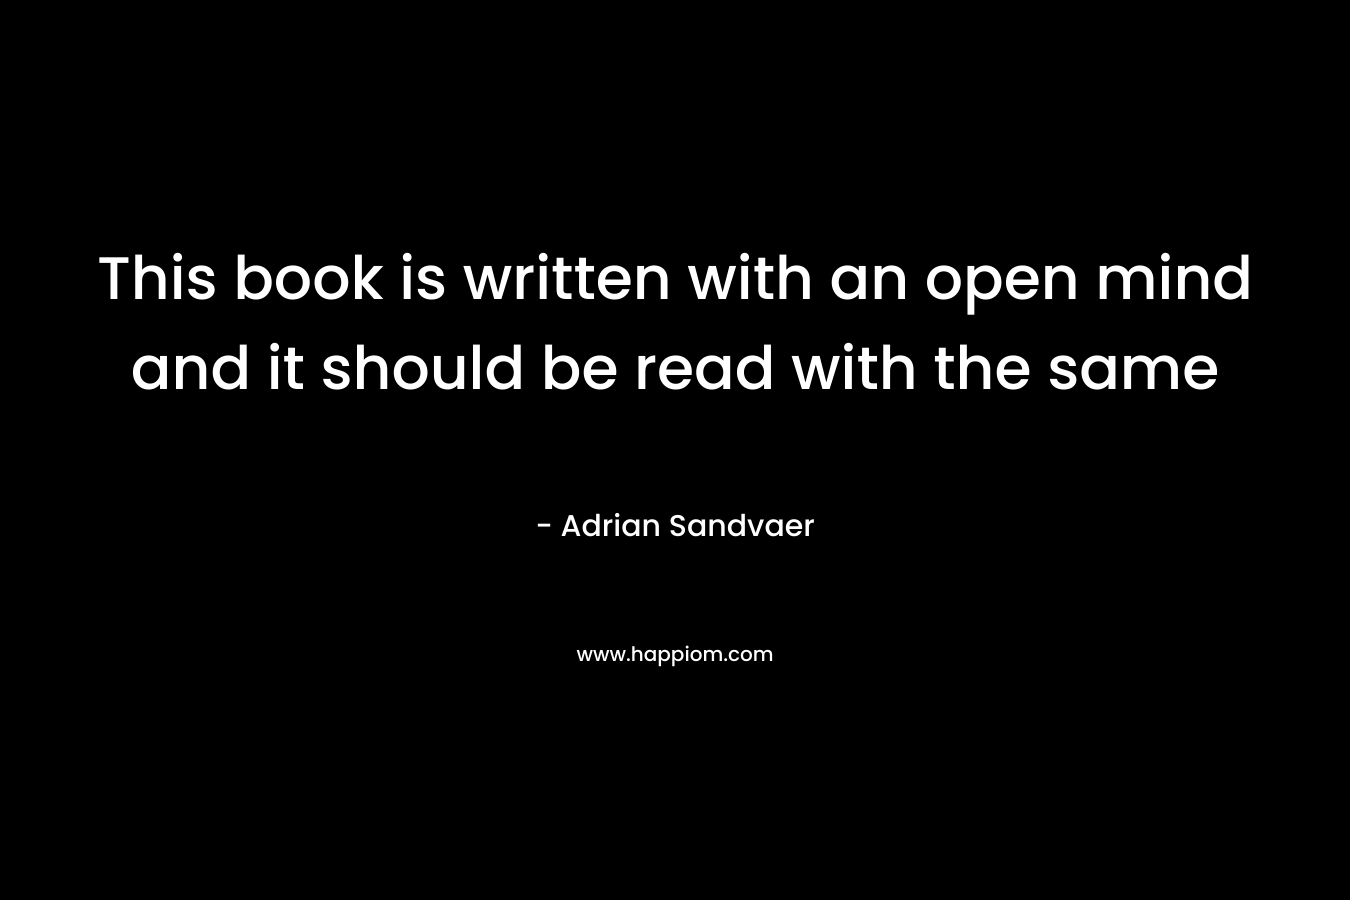 This book is written with an open mind and it should be read with the same – Adrian Sandvaer